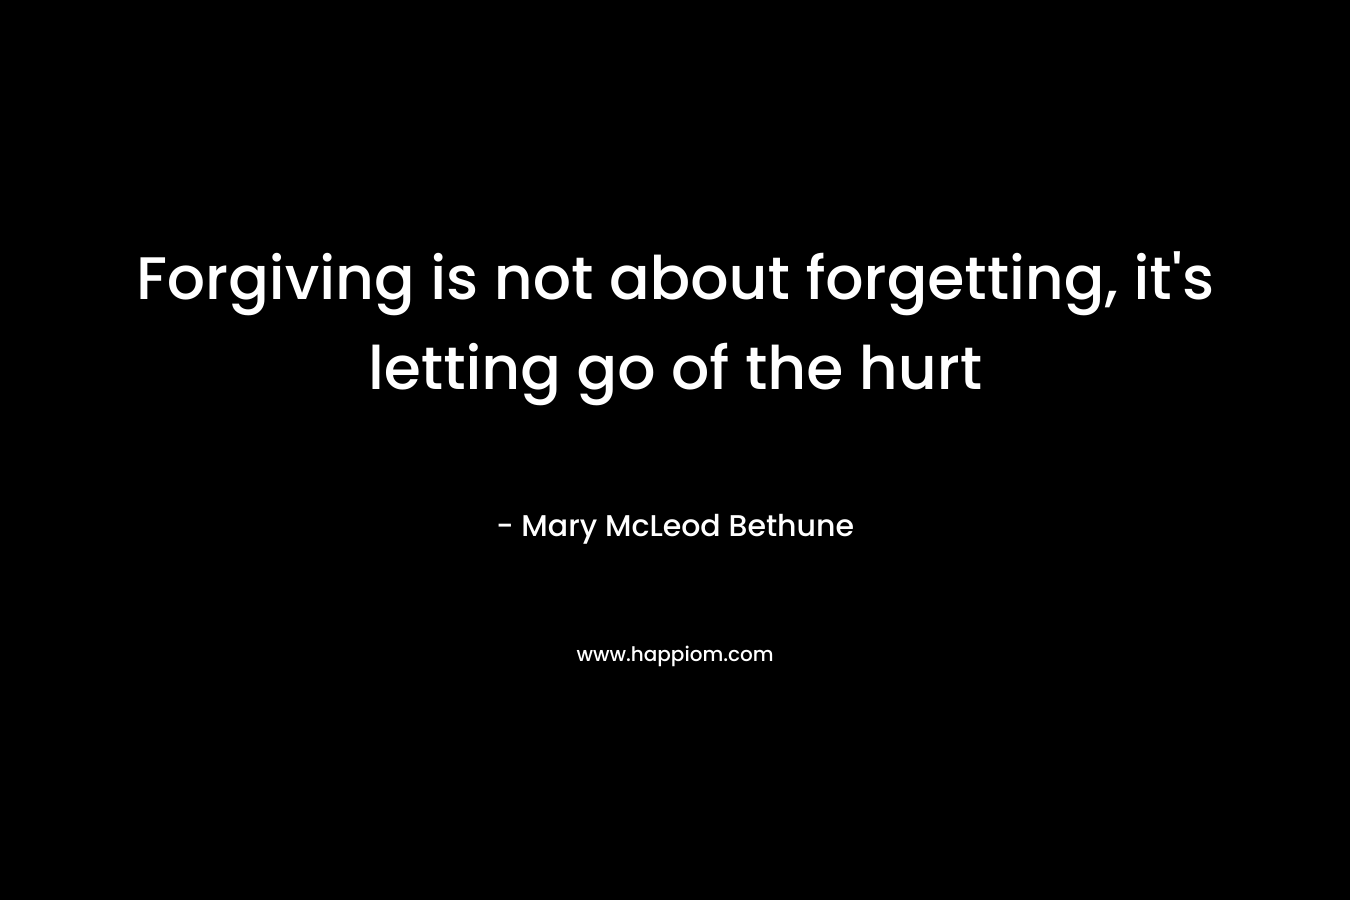 Forgiving is not about forgetting, it's letting go of the hurt